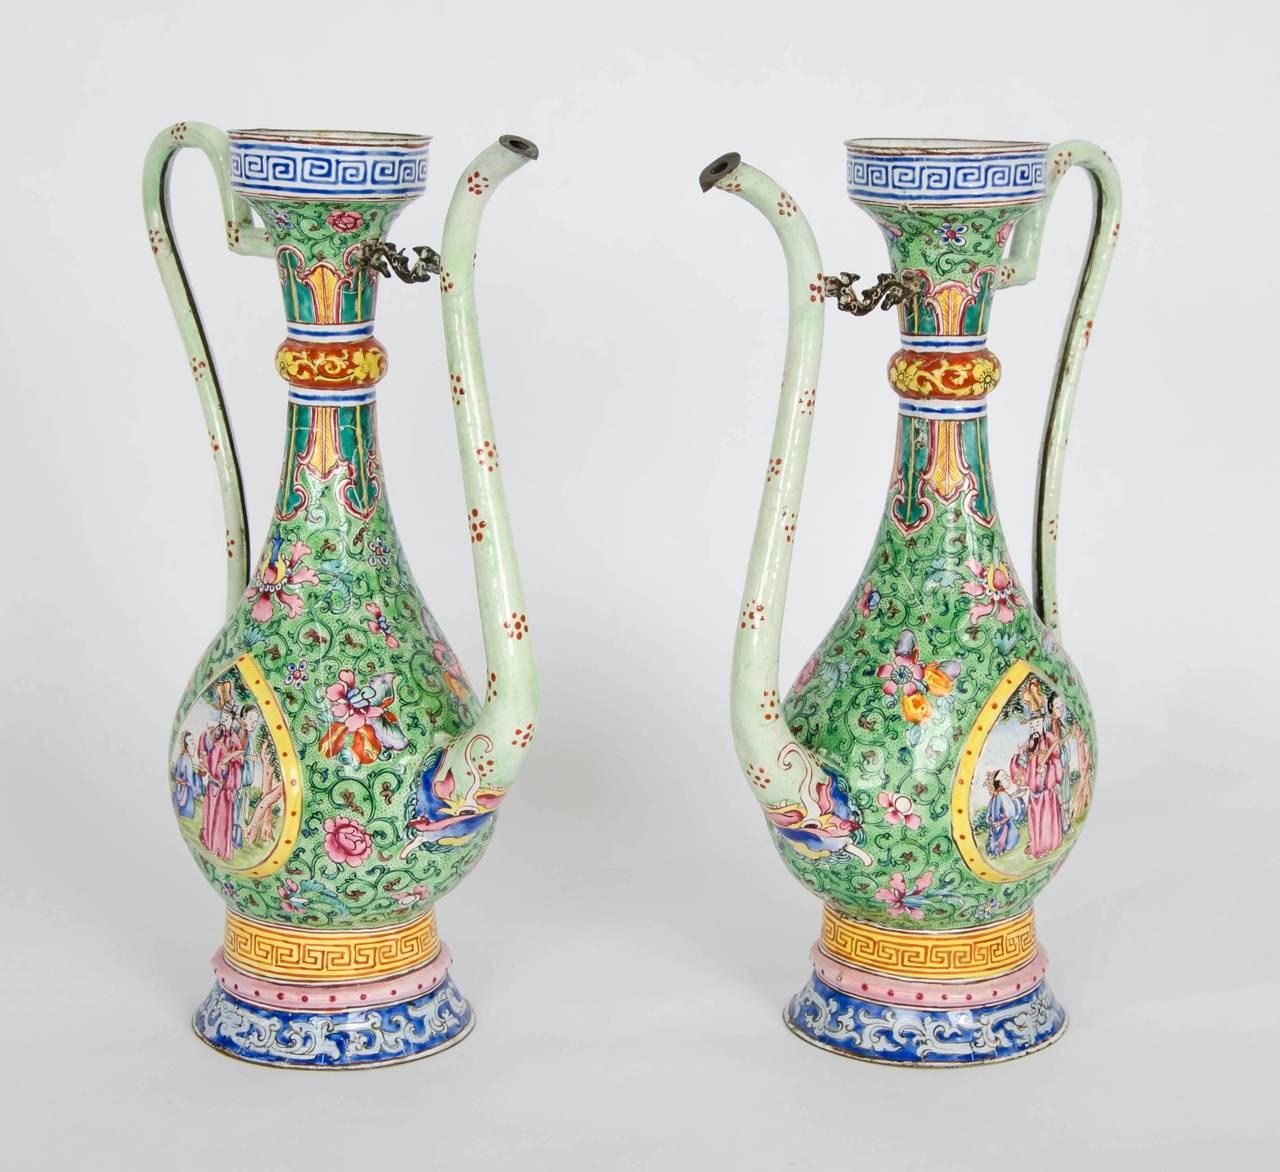 18th Century Chinese Enamel Vases with Persian Style Decorations 4